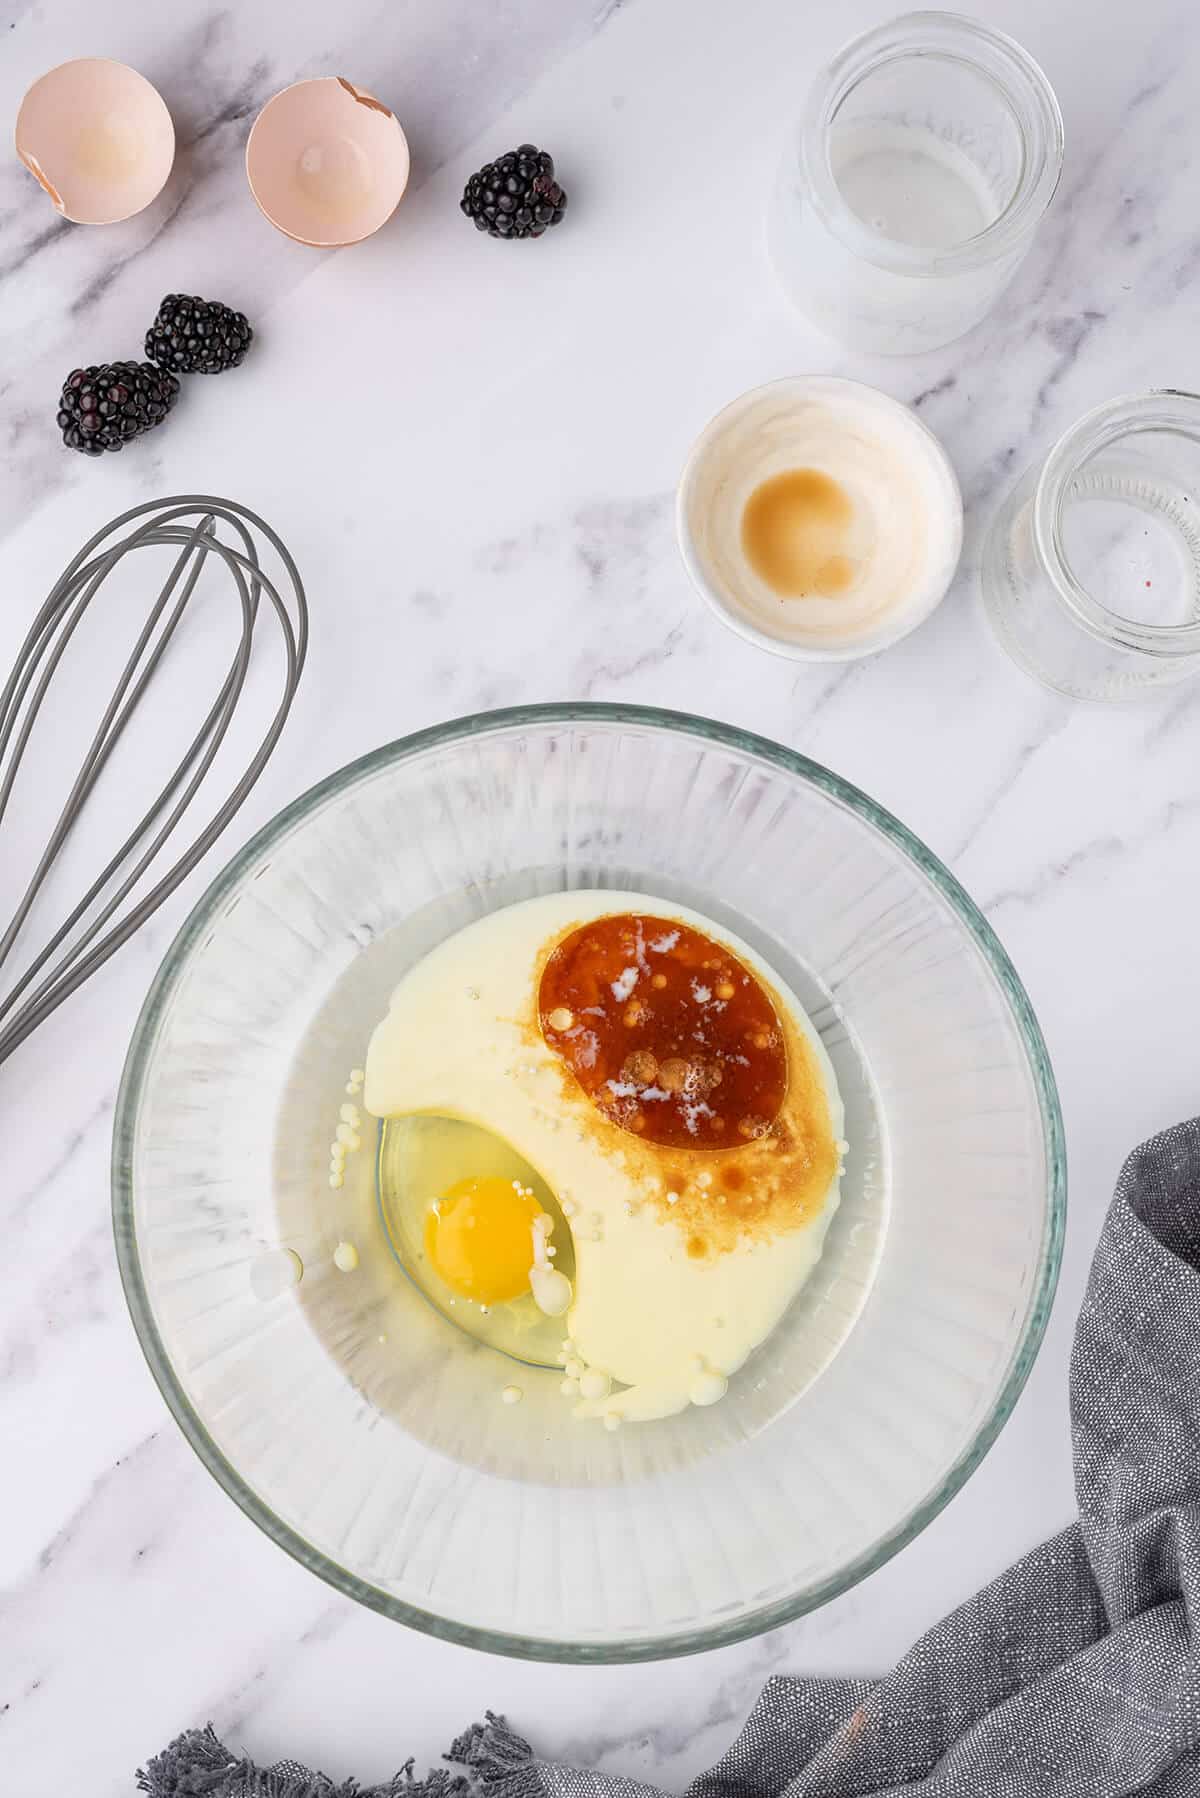 Egg and buttermilk combined in a clear glass bowl.